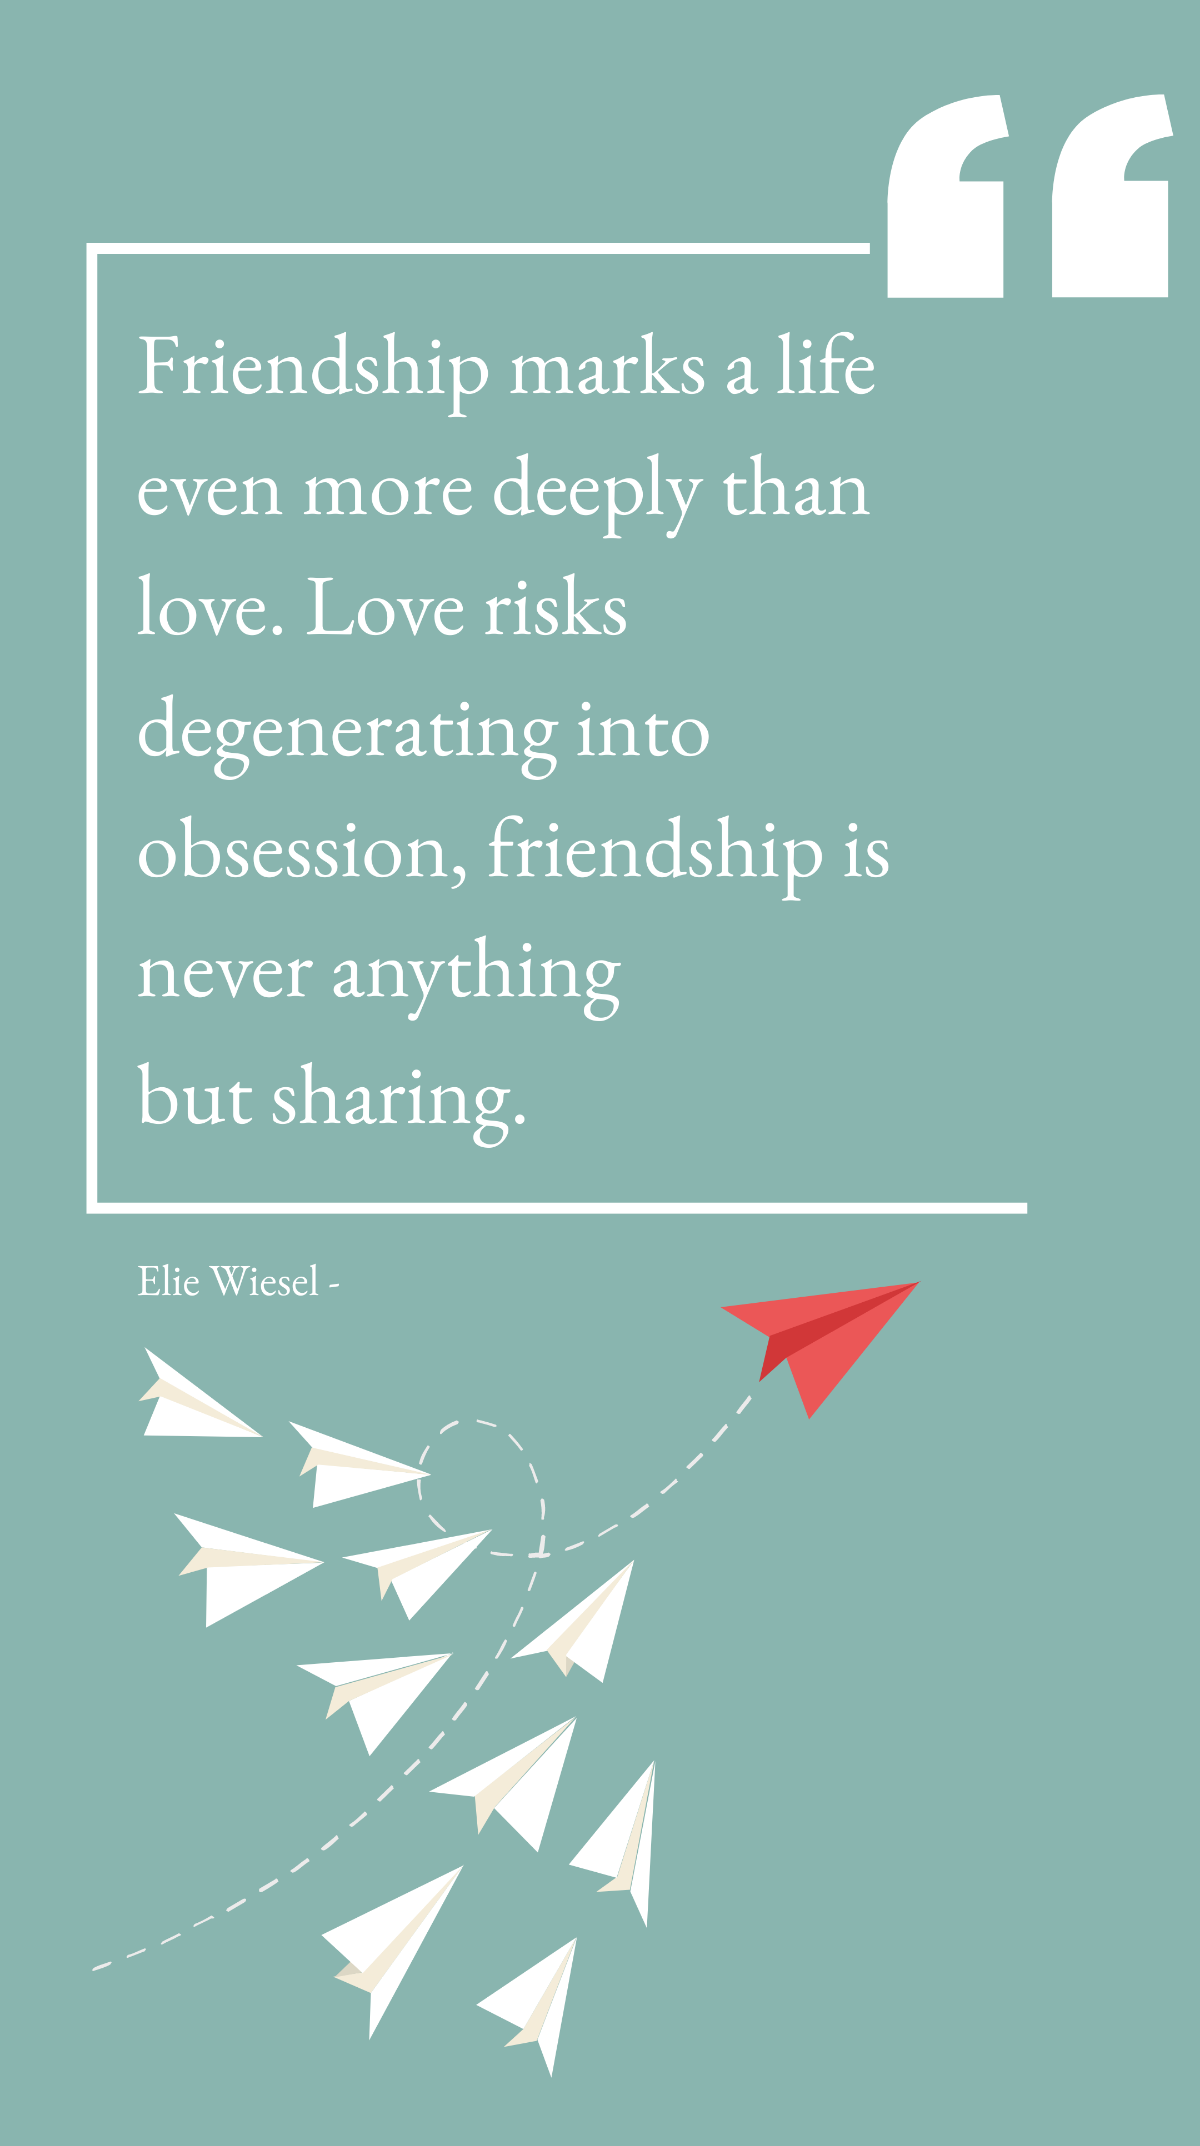 Elie Wiesel - Friendship marks a life even more deeply than love. Love risks degenerating into obsession, friendship is never anything but sharing. Template